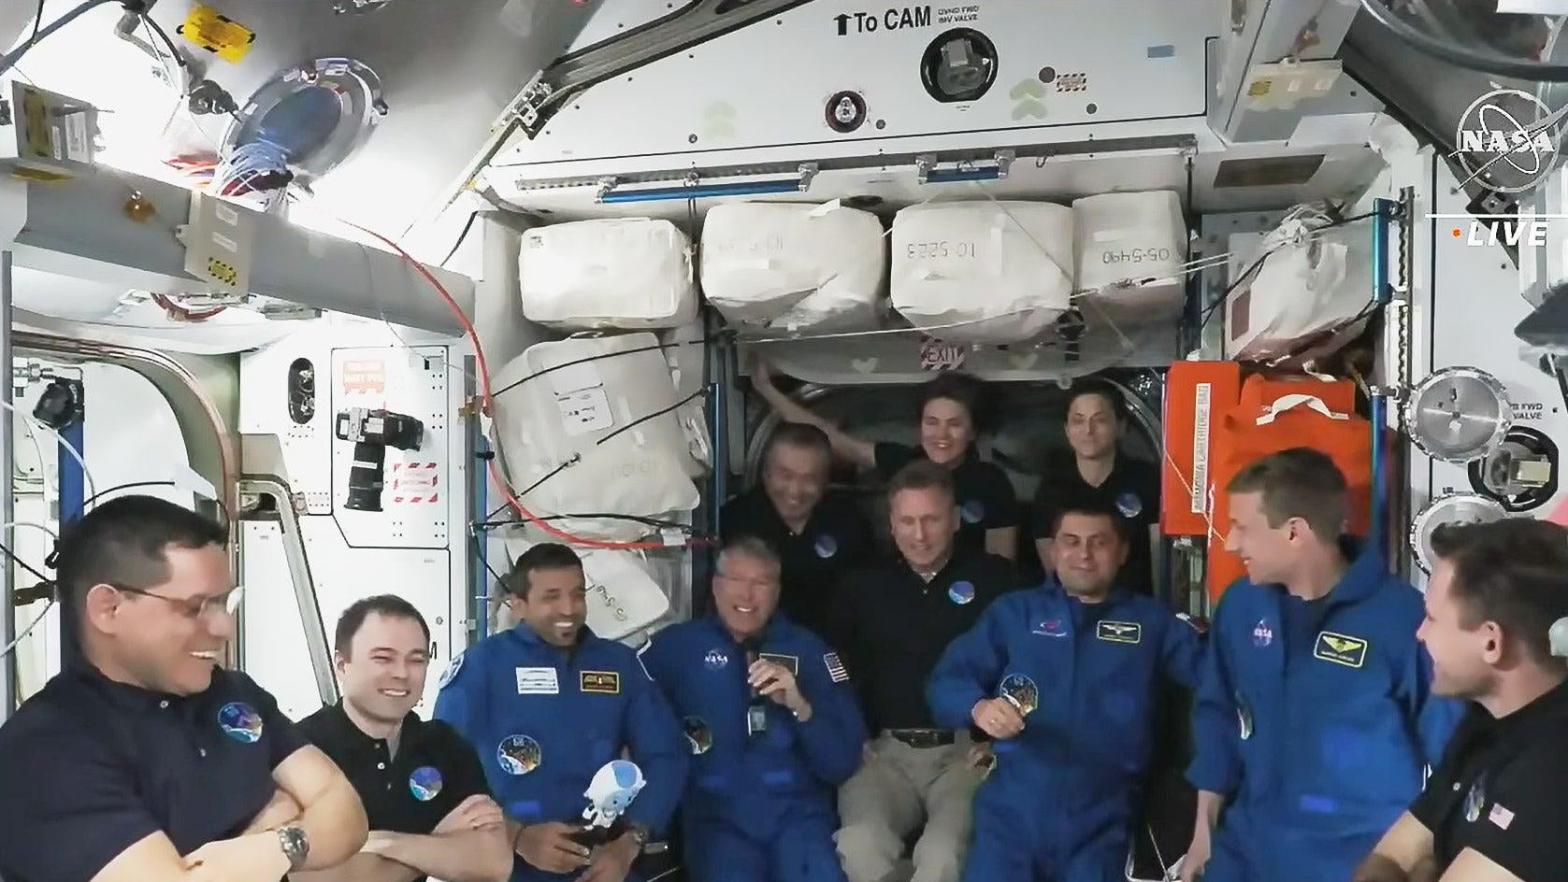 The Expedition 68 crew members welcoming Crew-6 members on board the space station. (Photo: NASA TV)